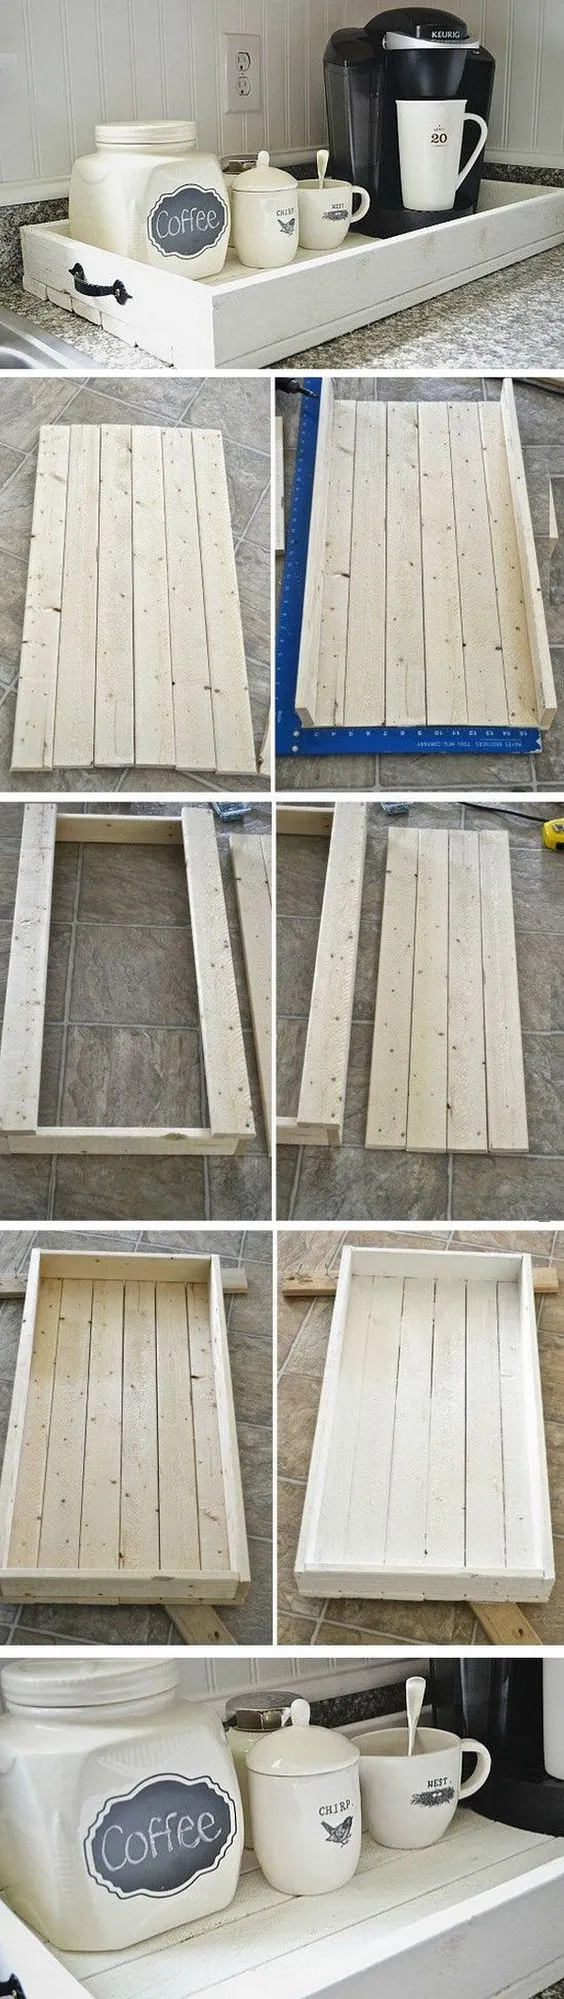 DIY Rustic Wood Tray. Love this tray for our coffee station in my kitchen! You can make it with some pallet wood boards and a bit of woodworking skills.: 